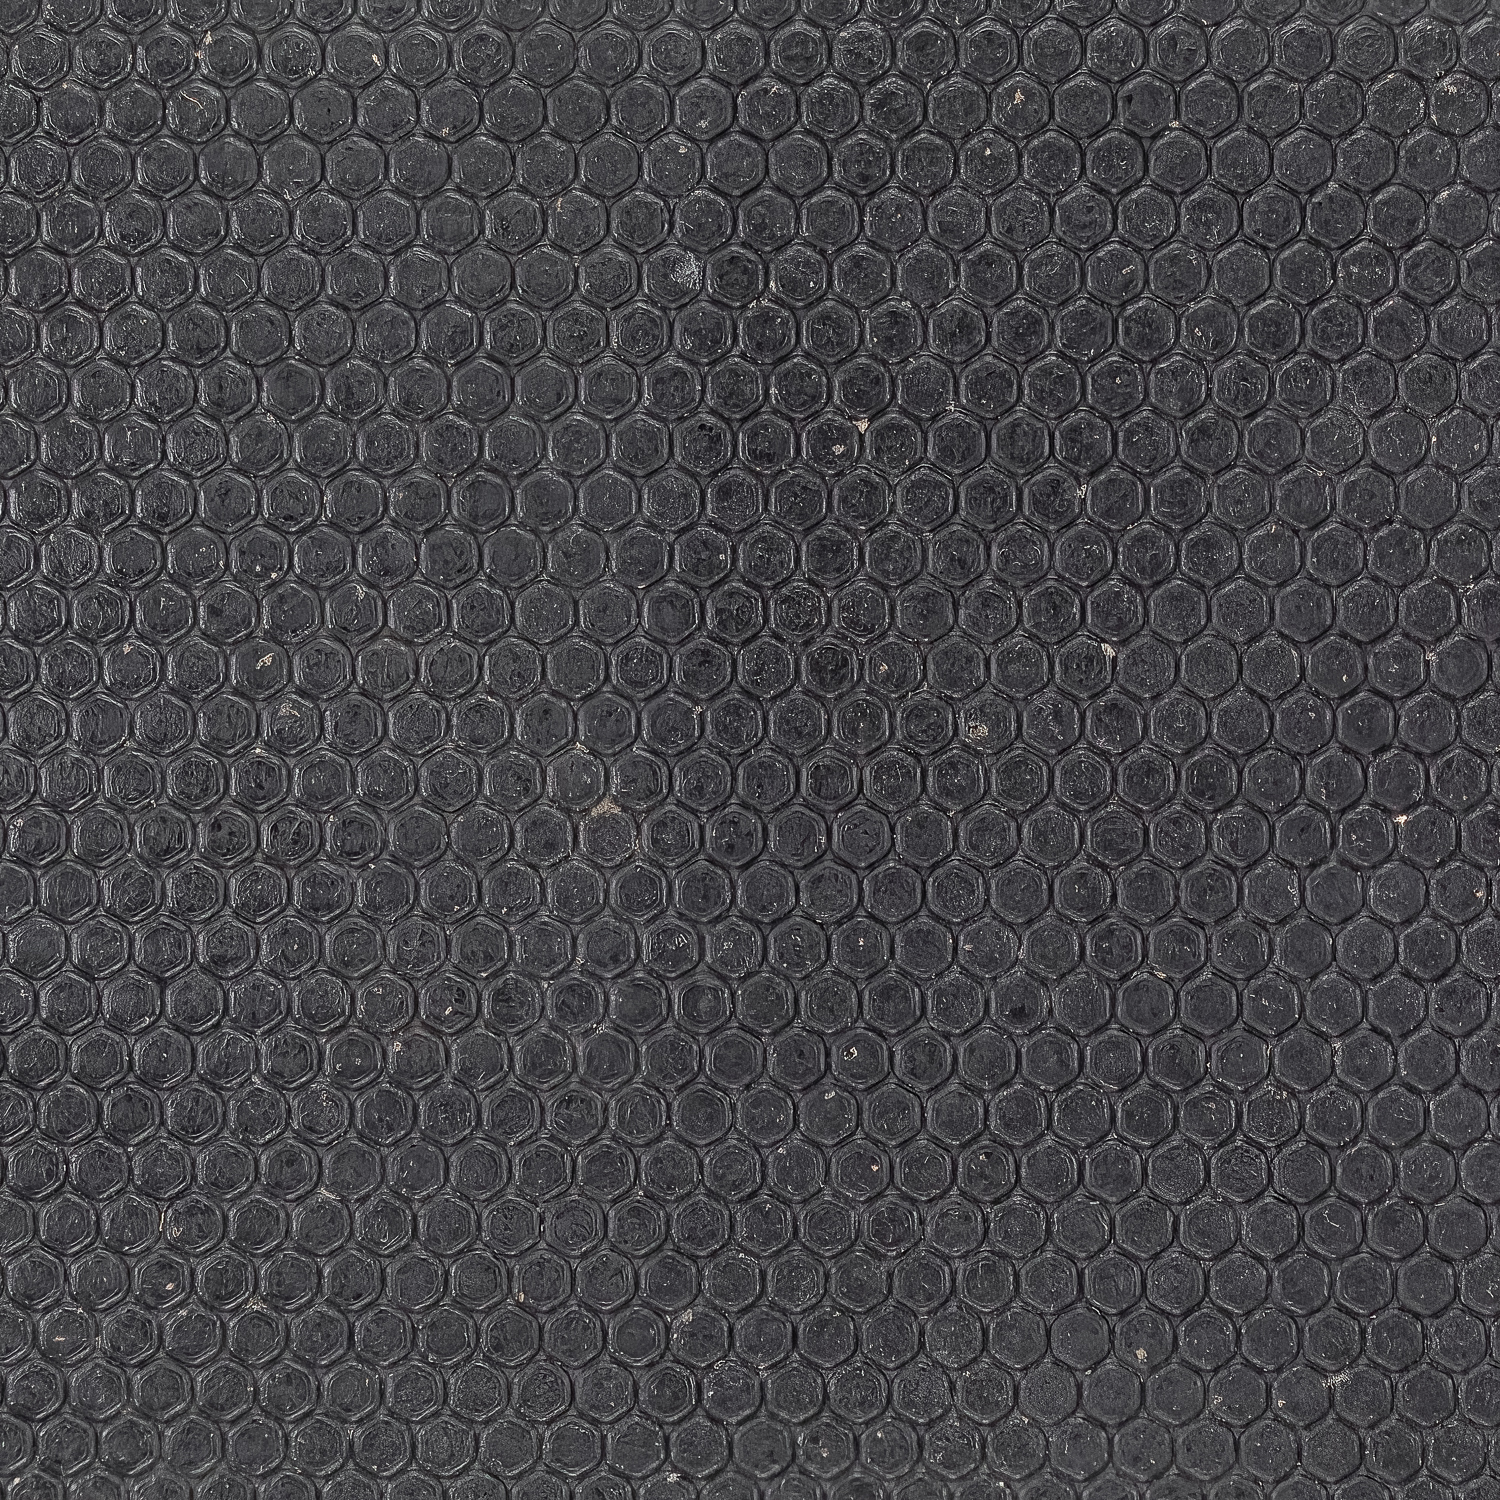 Horse Stall Mat Kit 12x16 Ft x 3/4 In Black swatch.